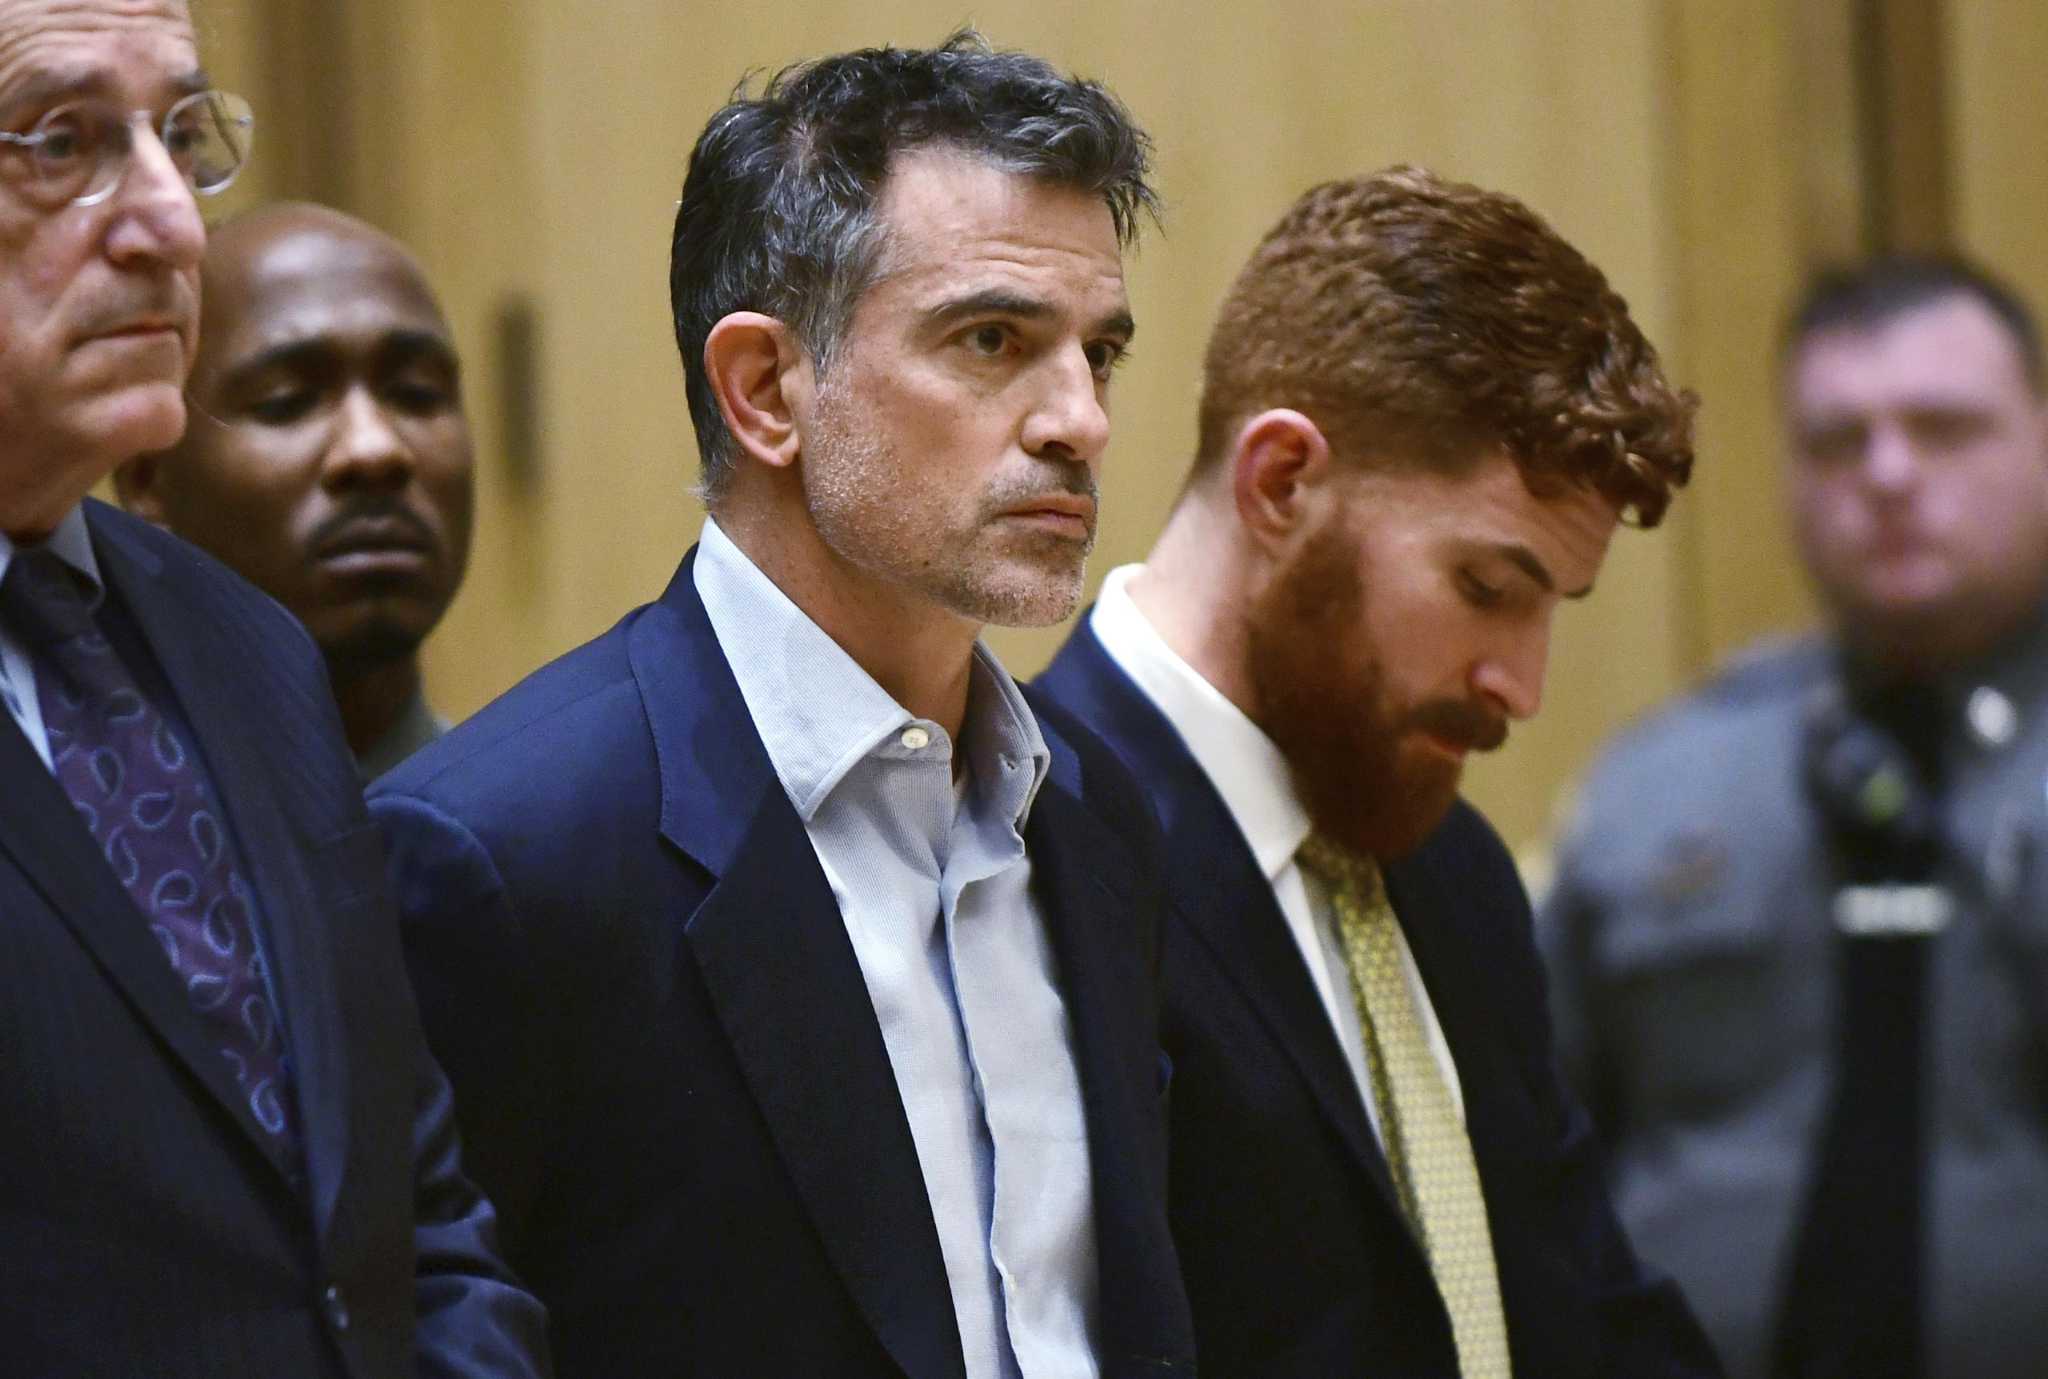 Fotis Dulos’ attorneys, mother-in-law clash for control of his assets - Connecticut Post2048 x 1379